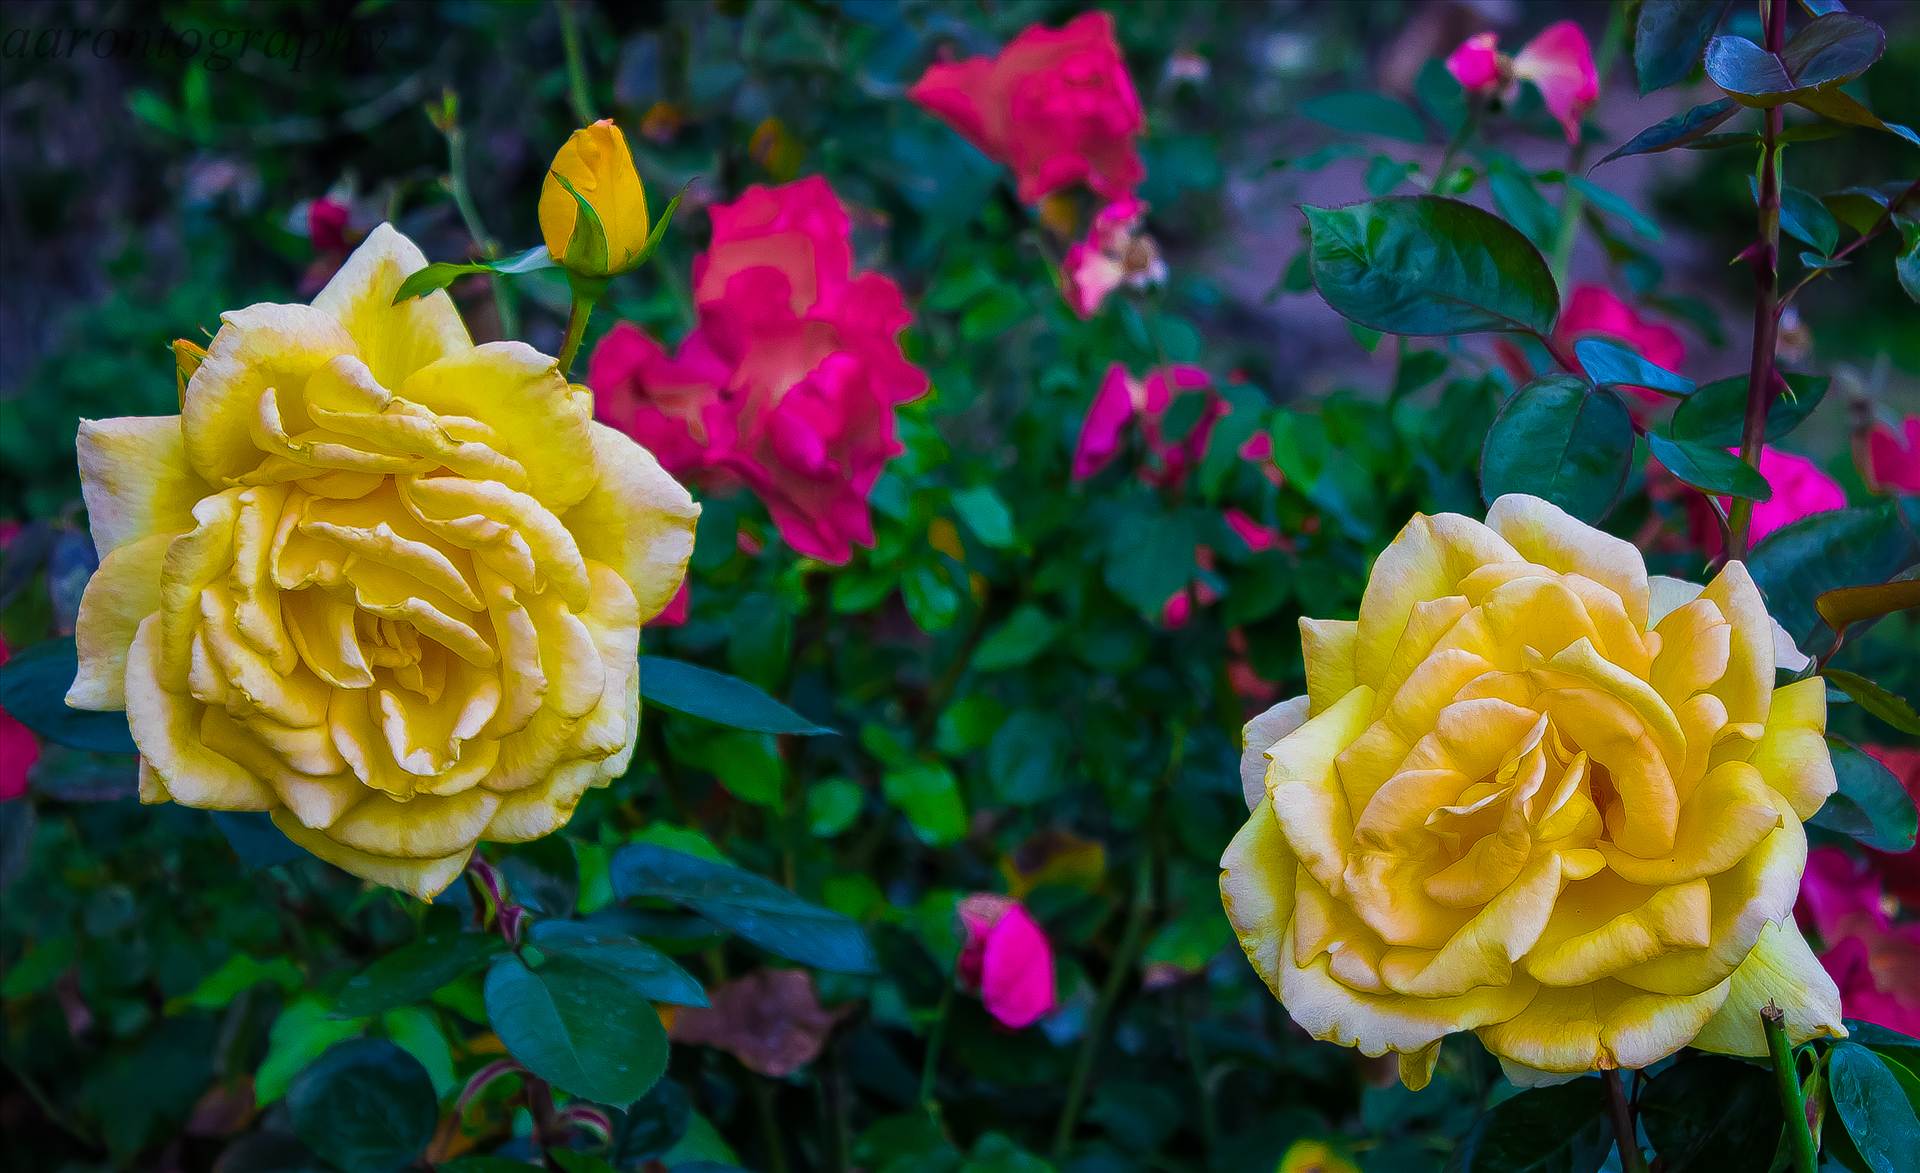 PINK SURROUNDED BY YELLOW.JPG undefined by Aaron